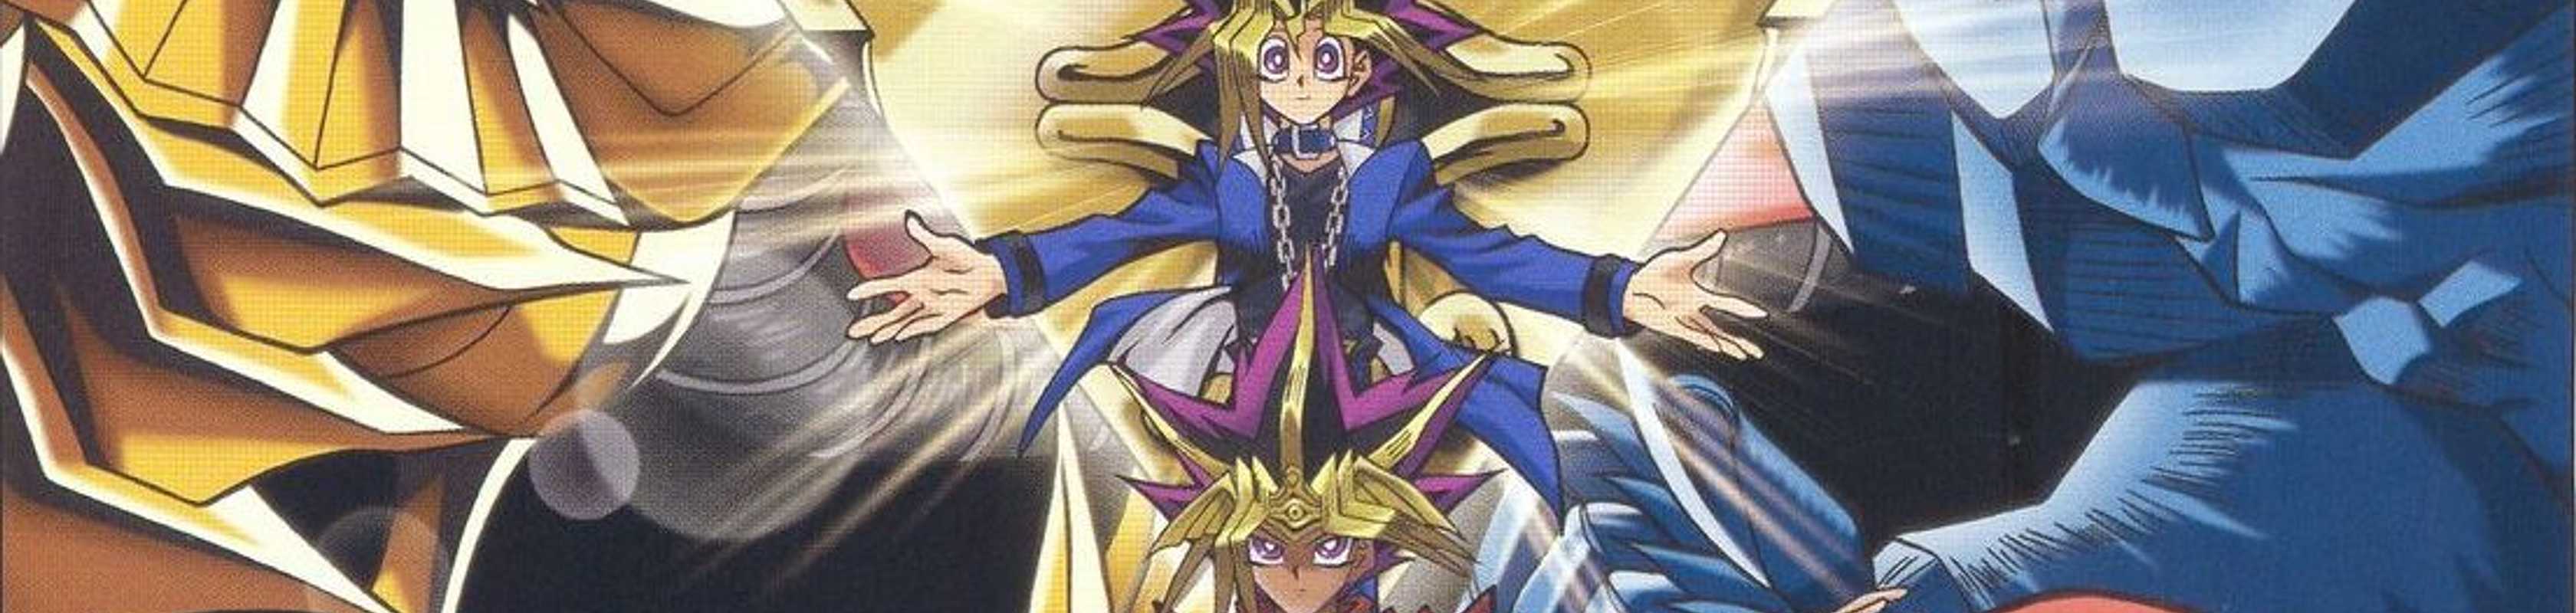 Yu☆Gi☆Oh! Duel Monsters cover